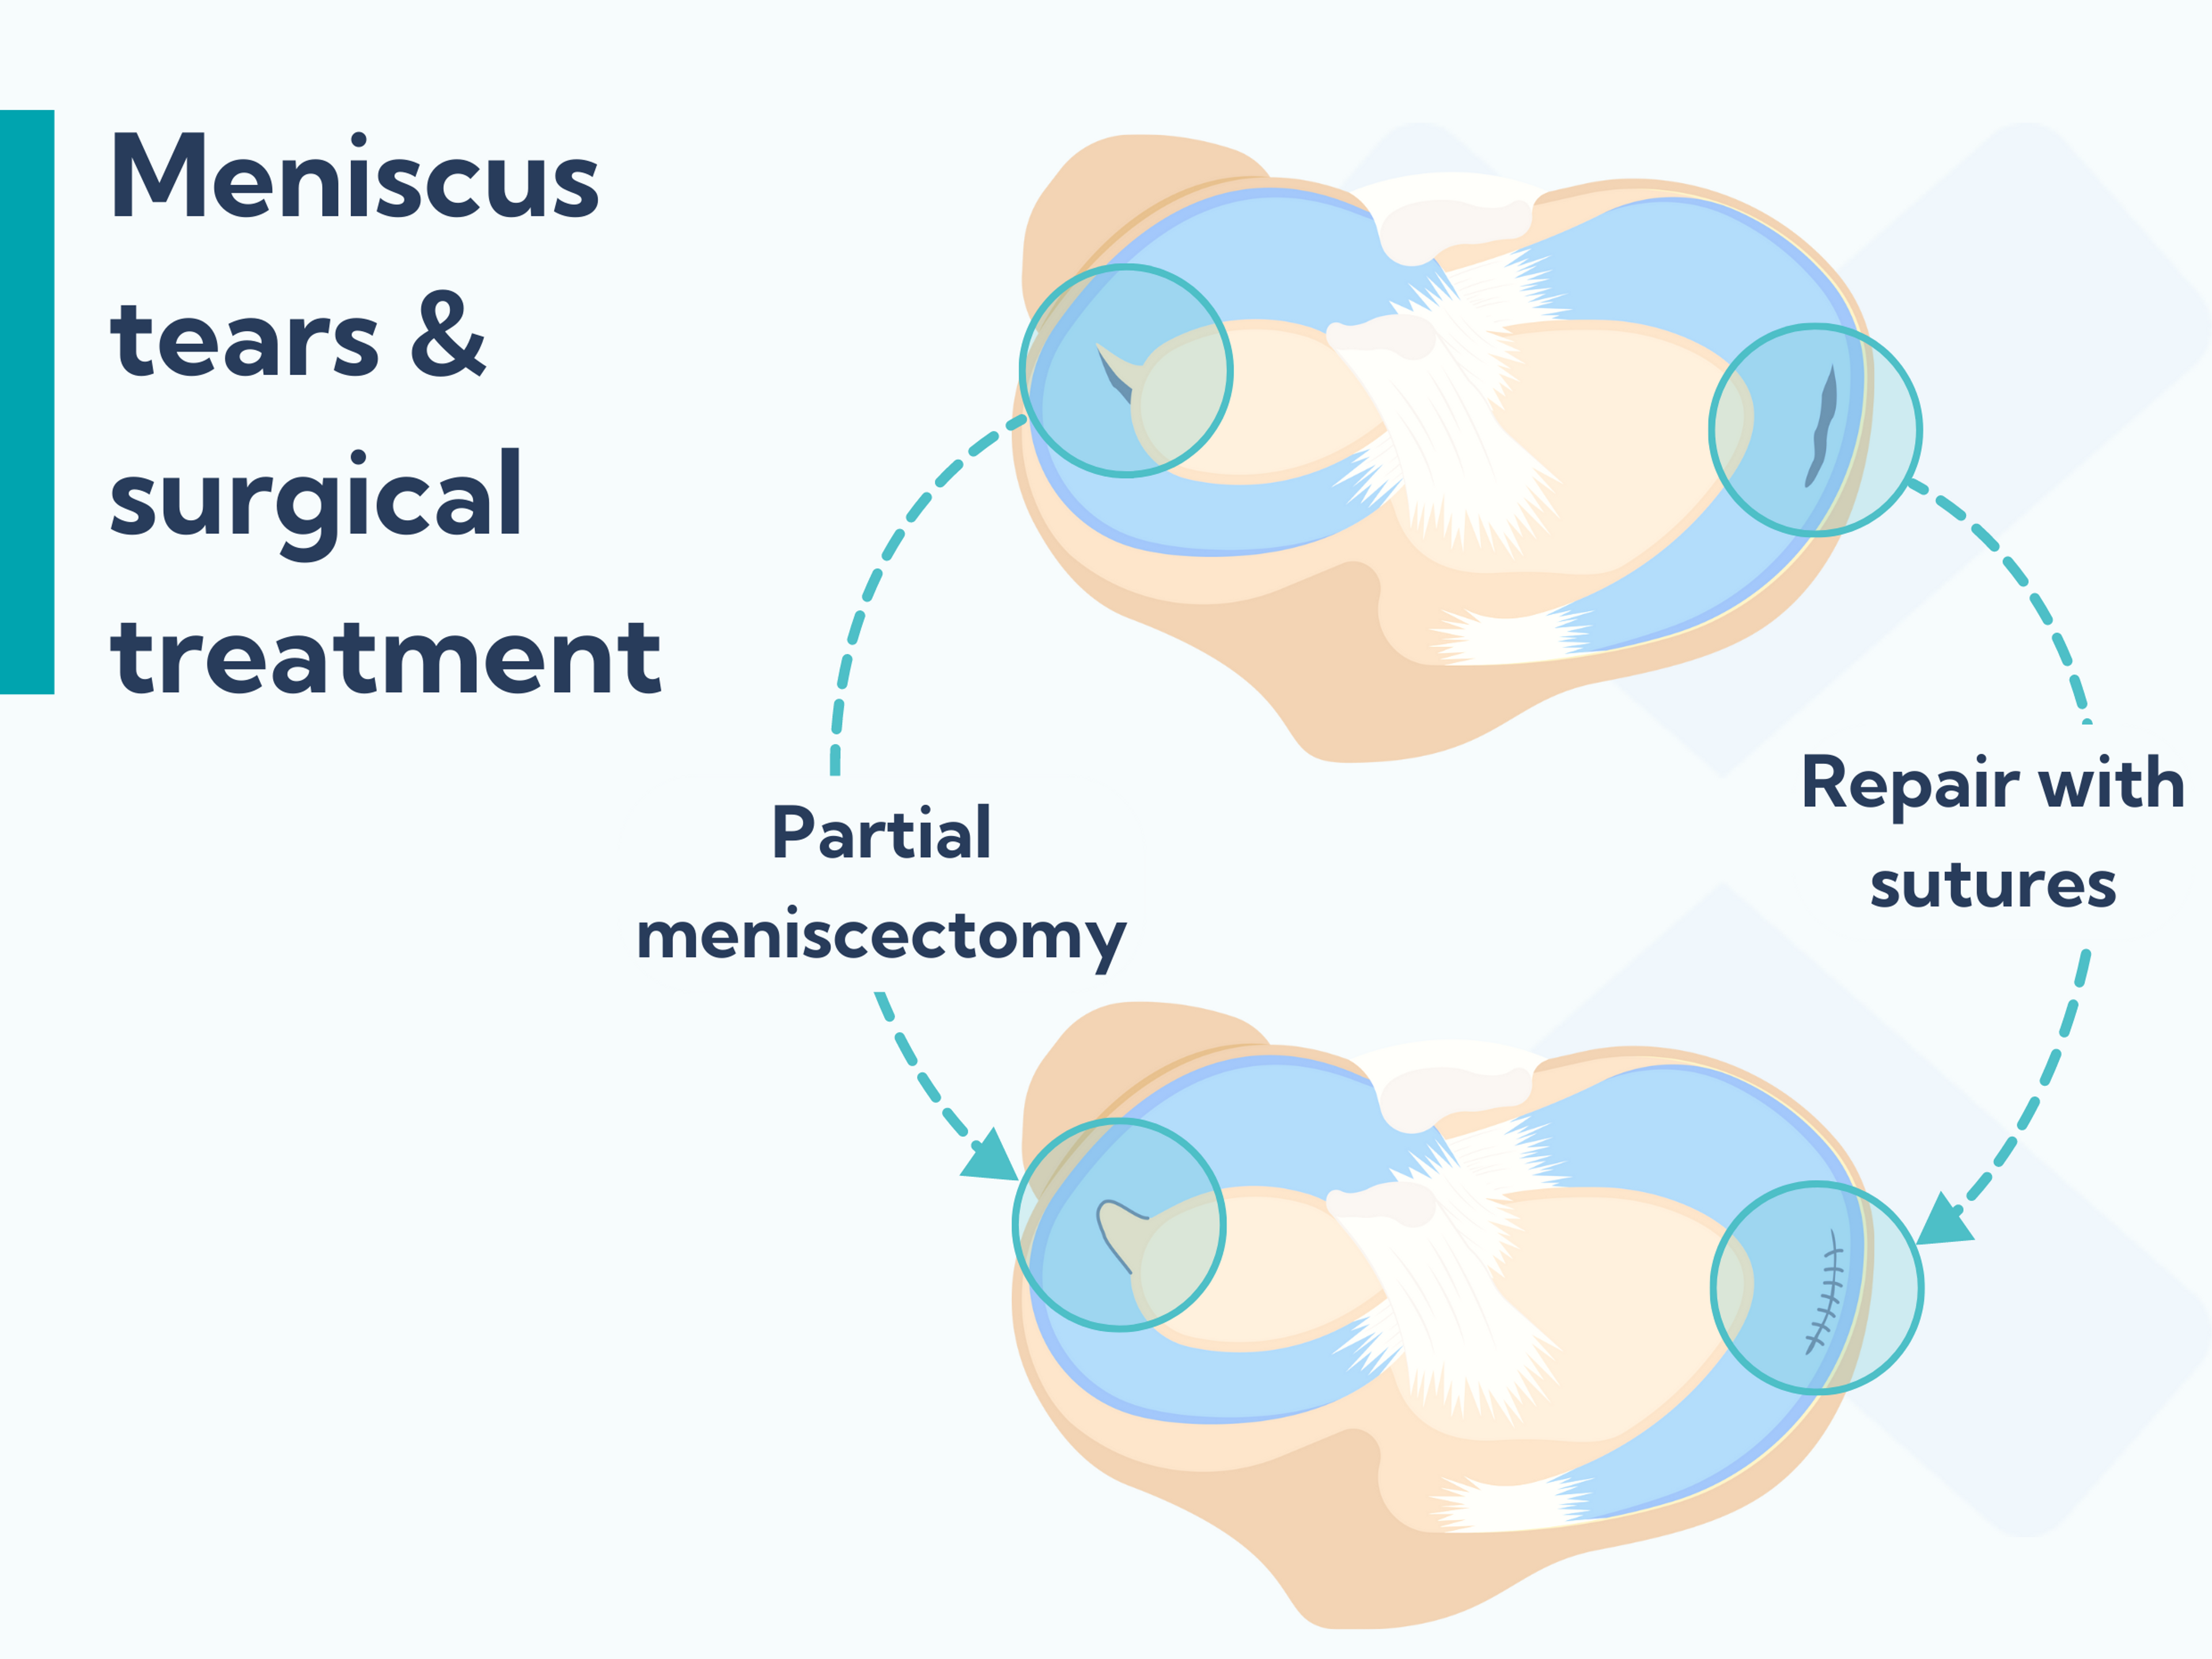 A meniscus tear can either be repaired or trimmed.